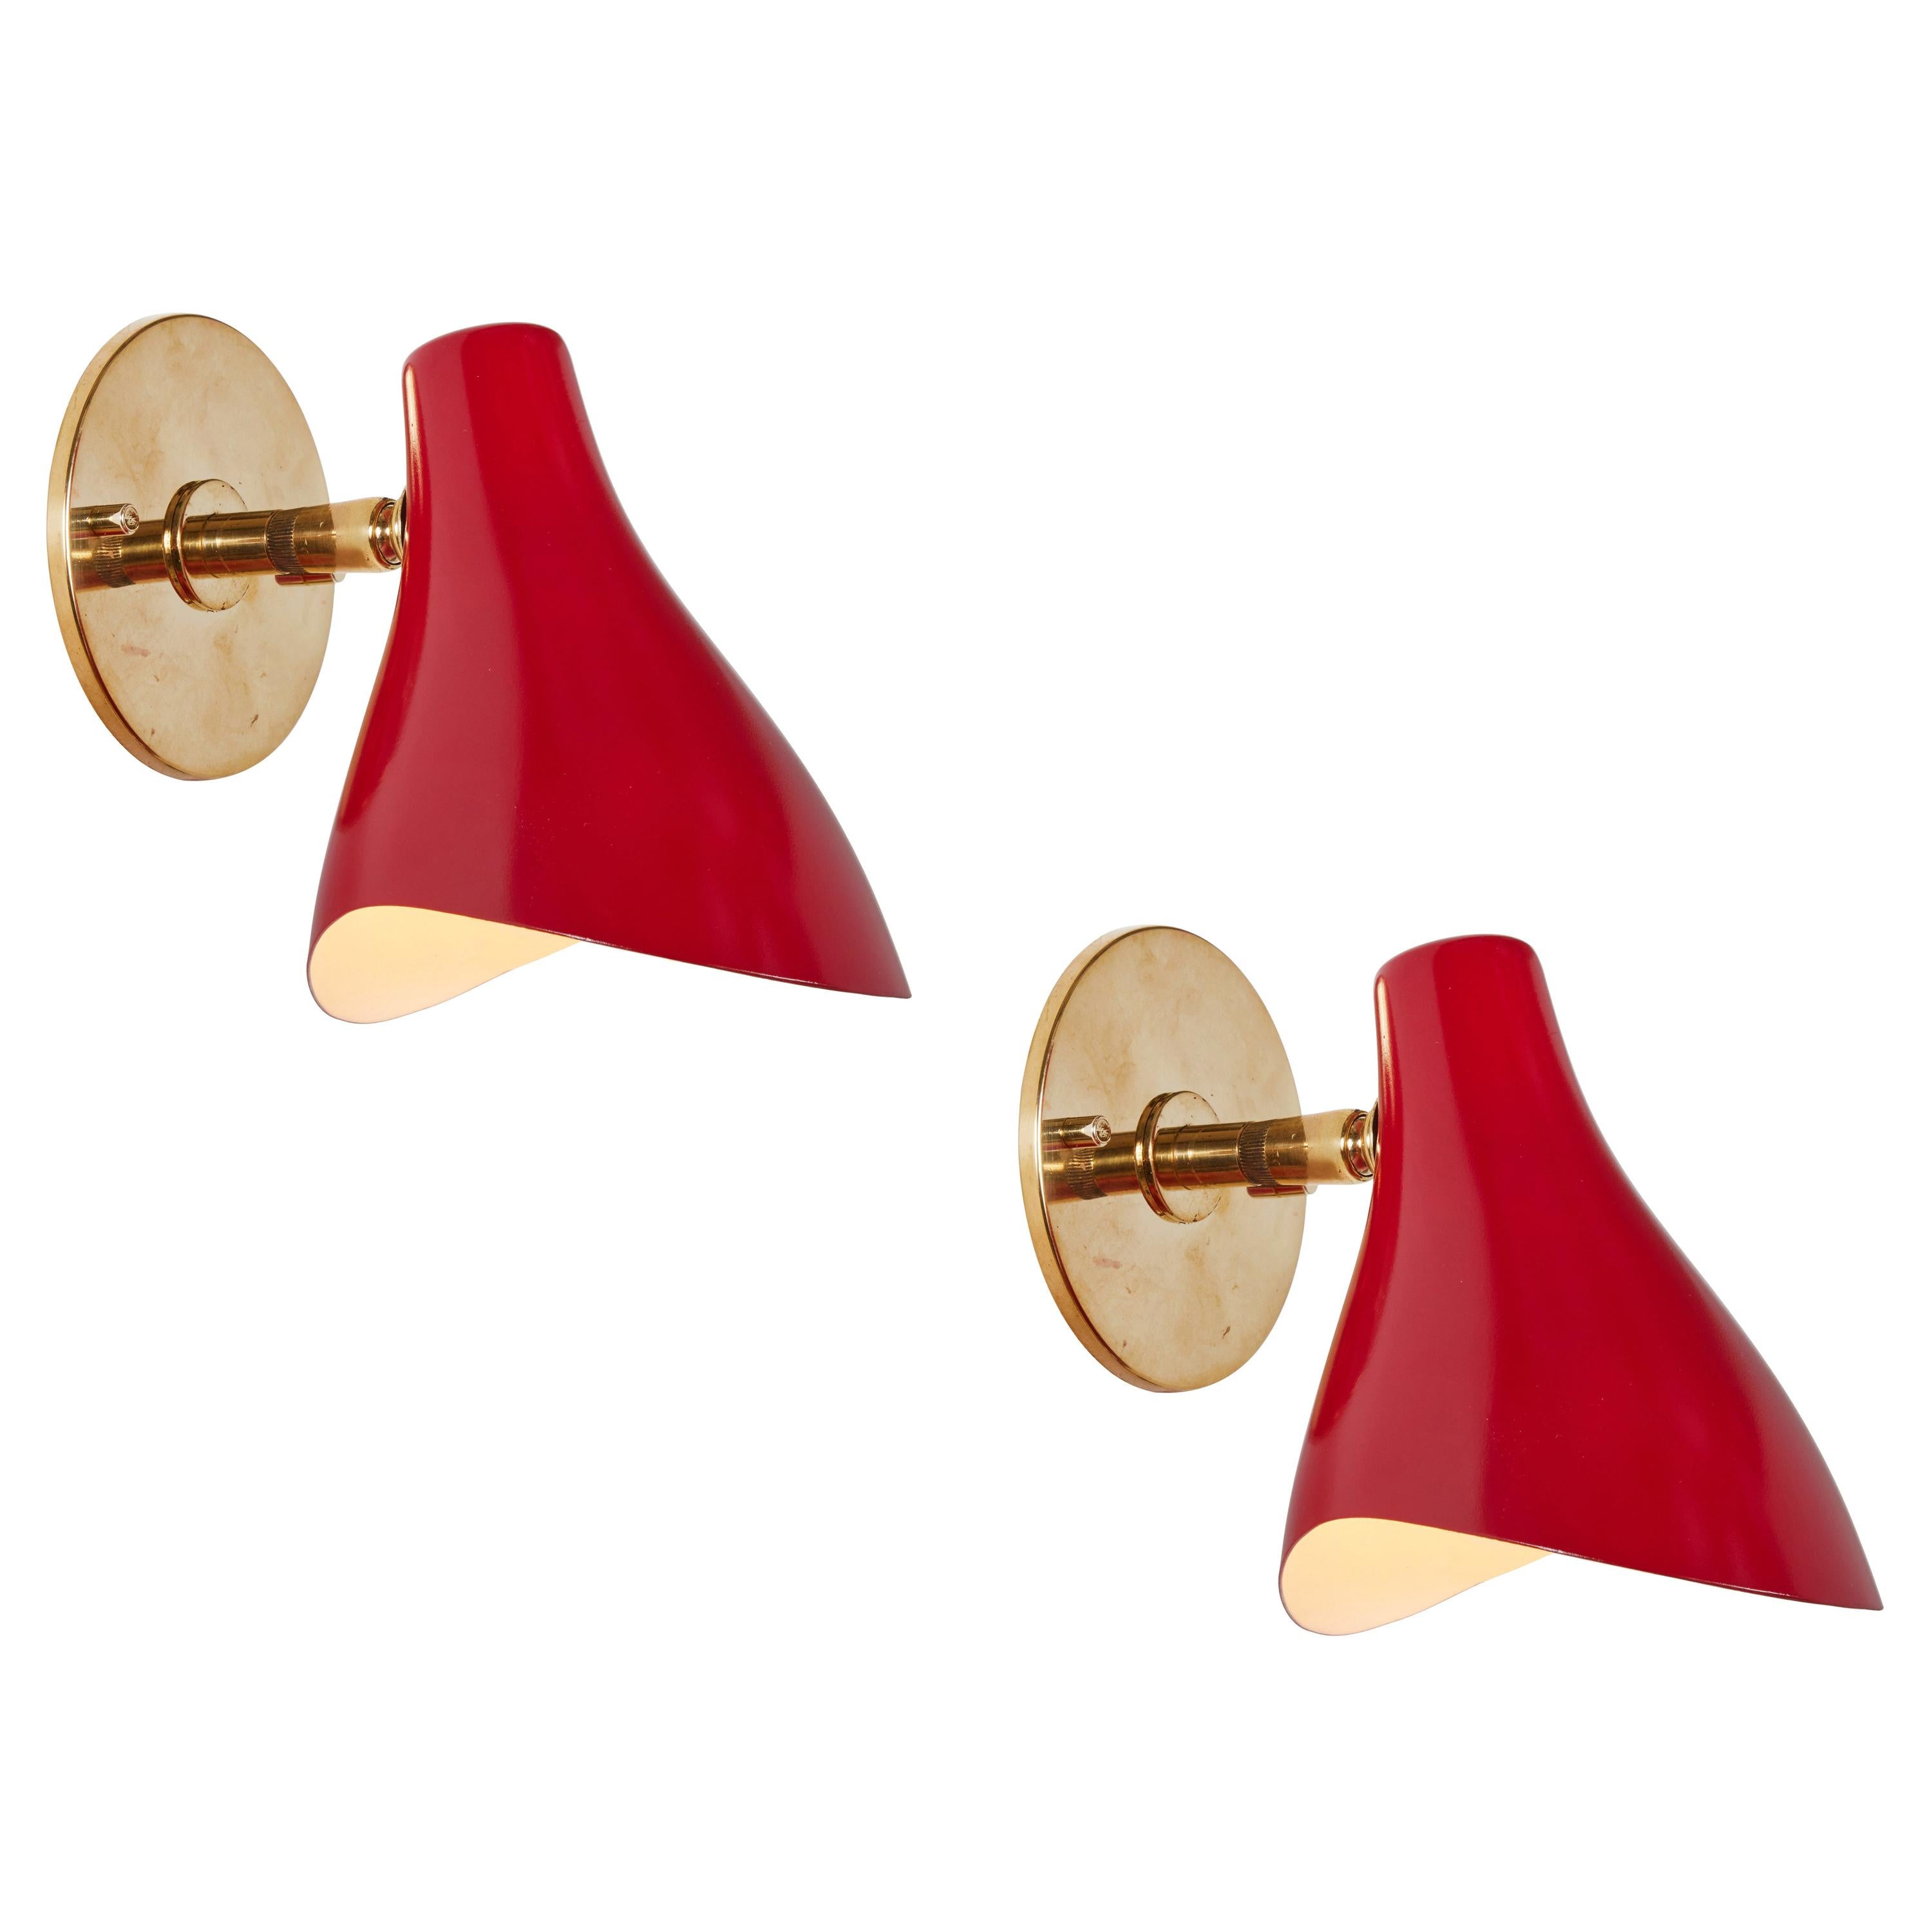 Pair of Gino Sarfatti Model #10 Sconces in Red for Arteluce